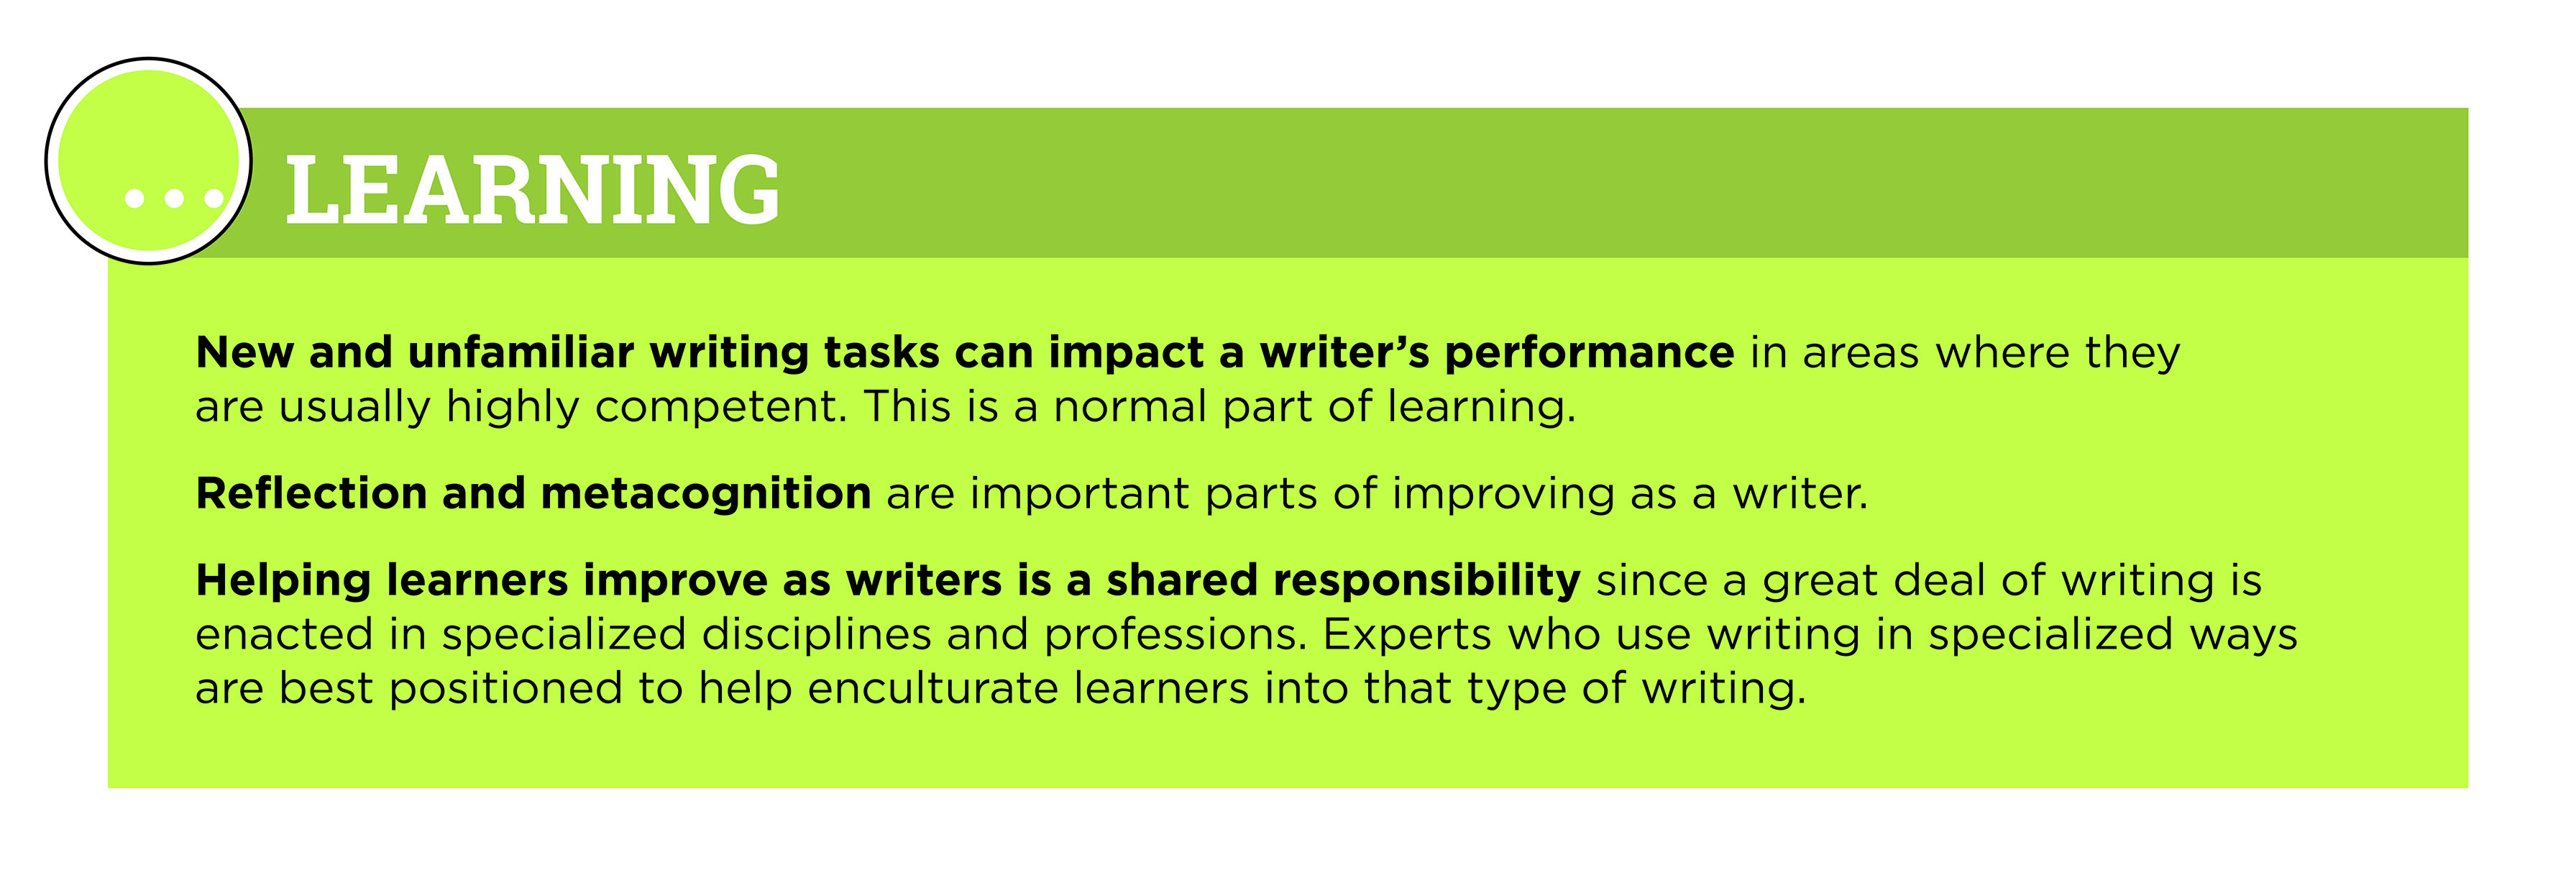 New and unfamiliar writing tasks can impact a writer's performance in areas where they are usually highly competent. This is a normal part of learning. Reflection and metacognition are important parts of improving as a writer. Helping learners  Boost as writers is a shared responsibility since a great deal of writing is enacted in specialized disciplines and professions. Experts who use writing in specialized ways are best positioned to help enculturate learners into that type of writing.